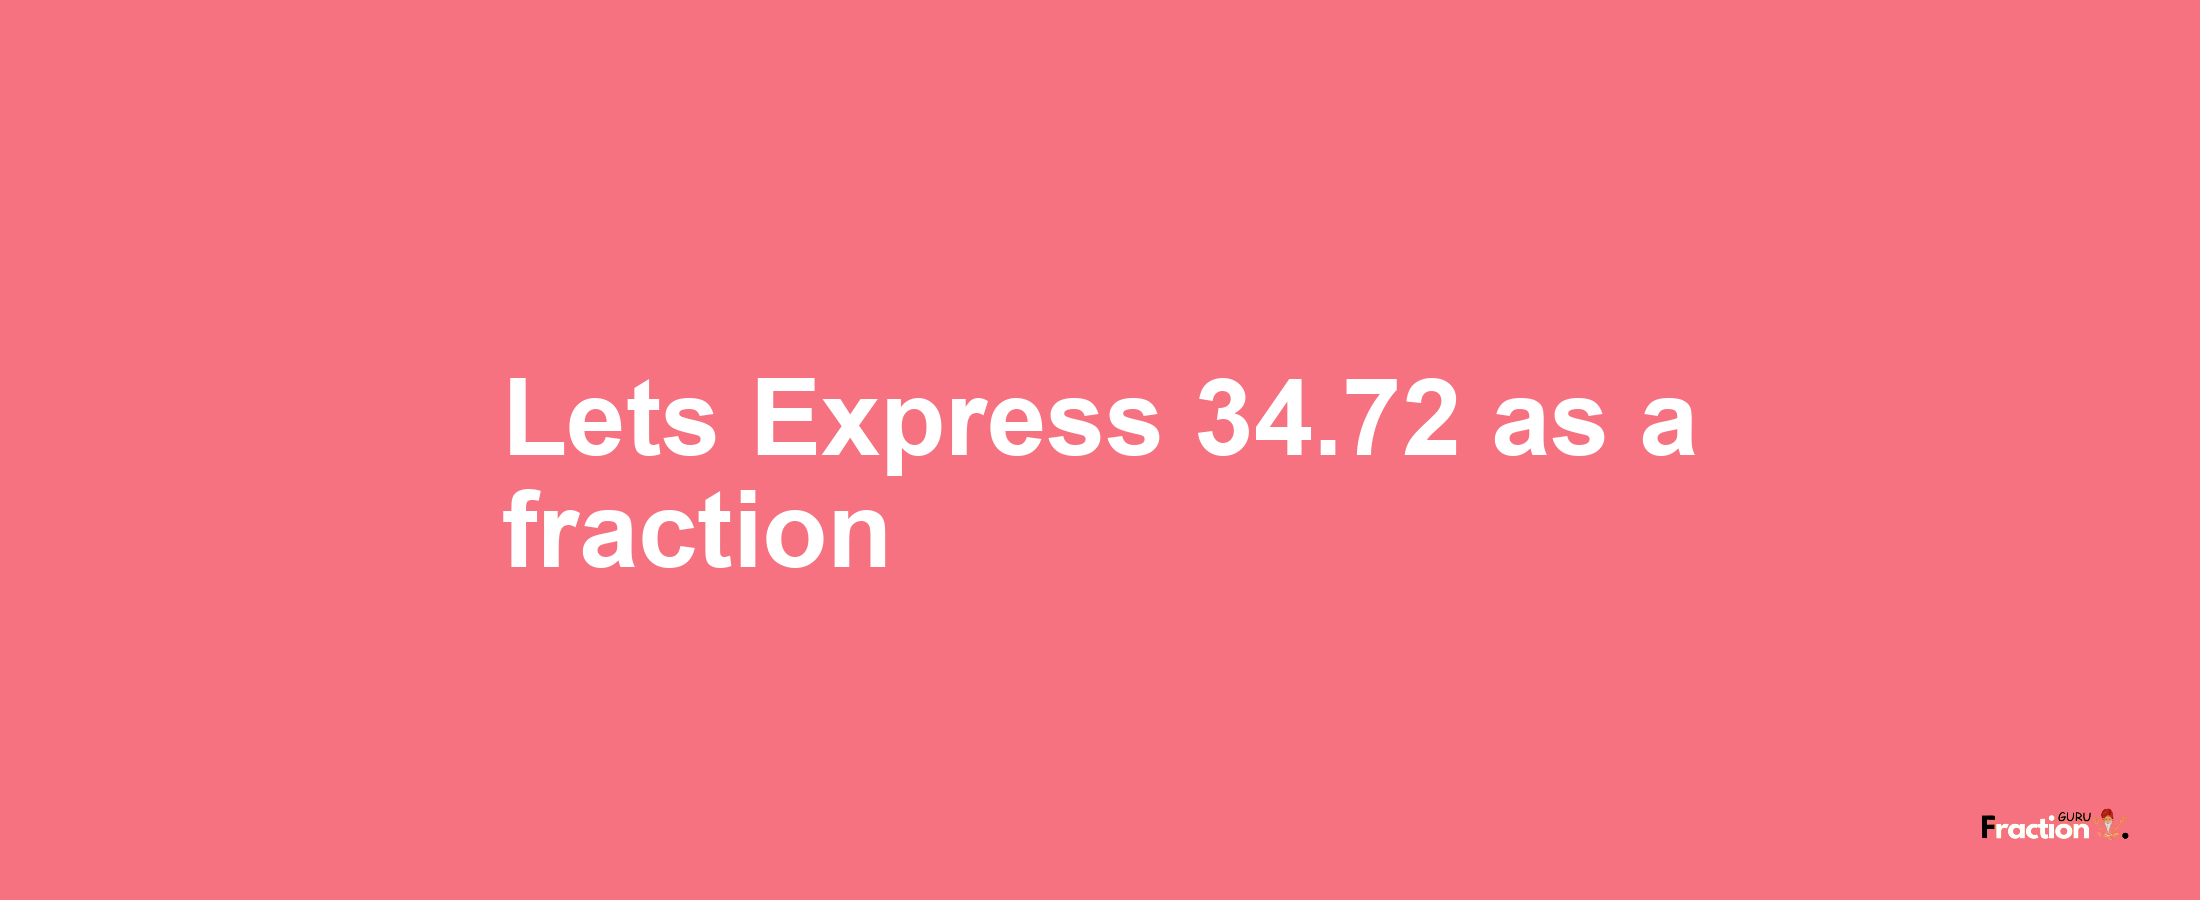 Lets Express 34.72 as afraction